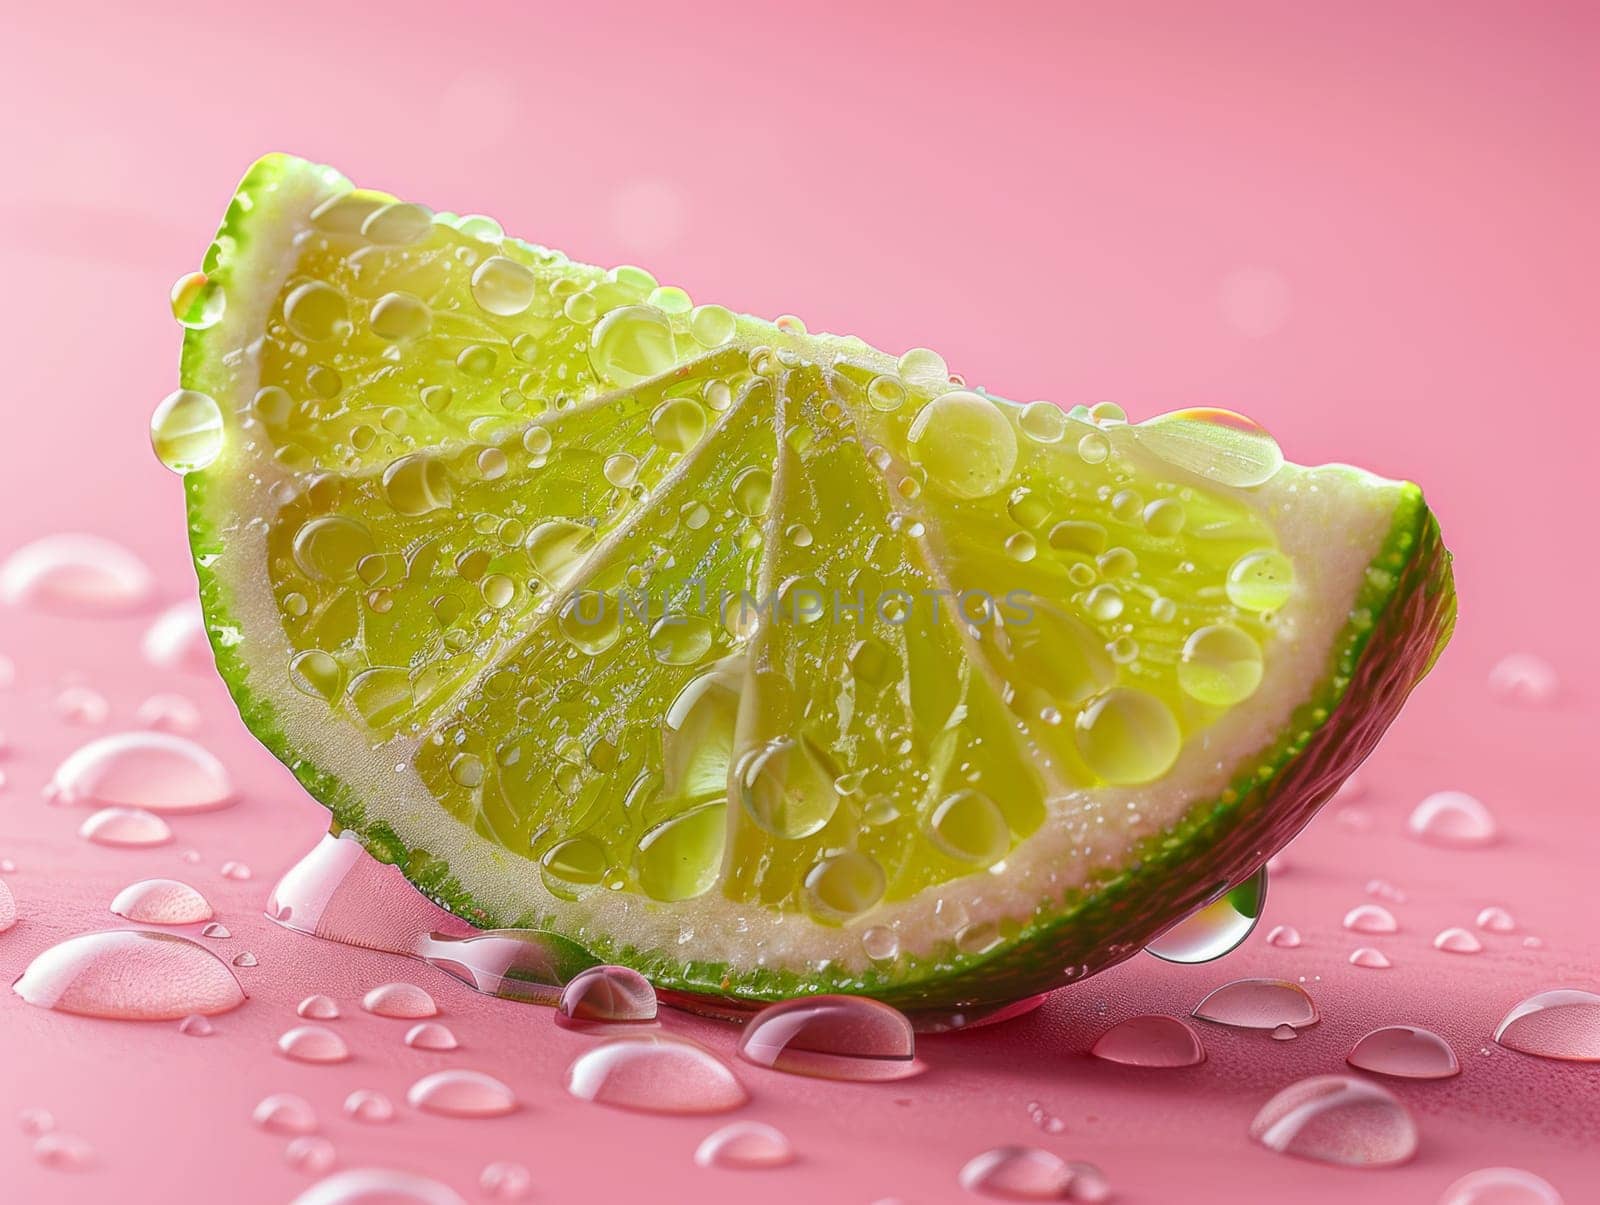 A vibrant green slice of lime delicately balanced on a soft pink surface, creating a contrasting and visually appealing scene.